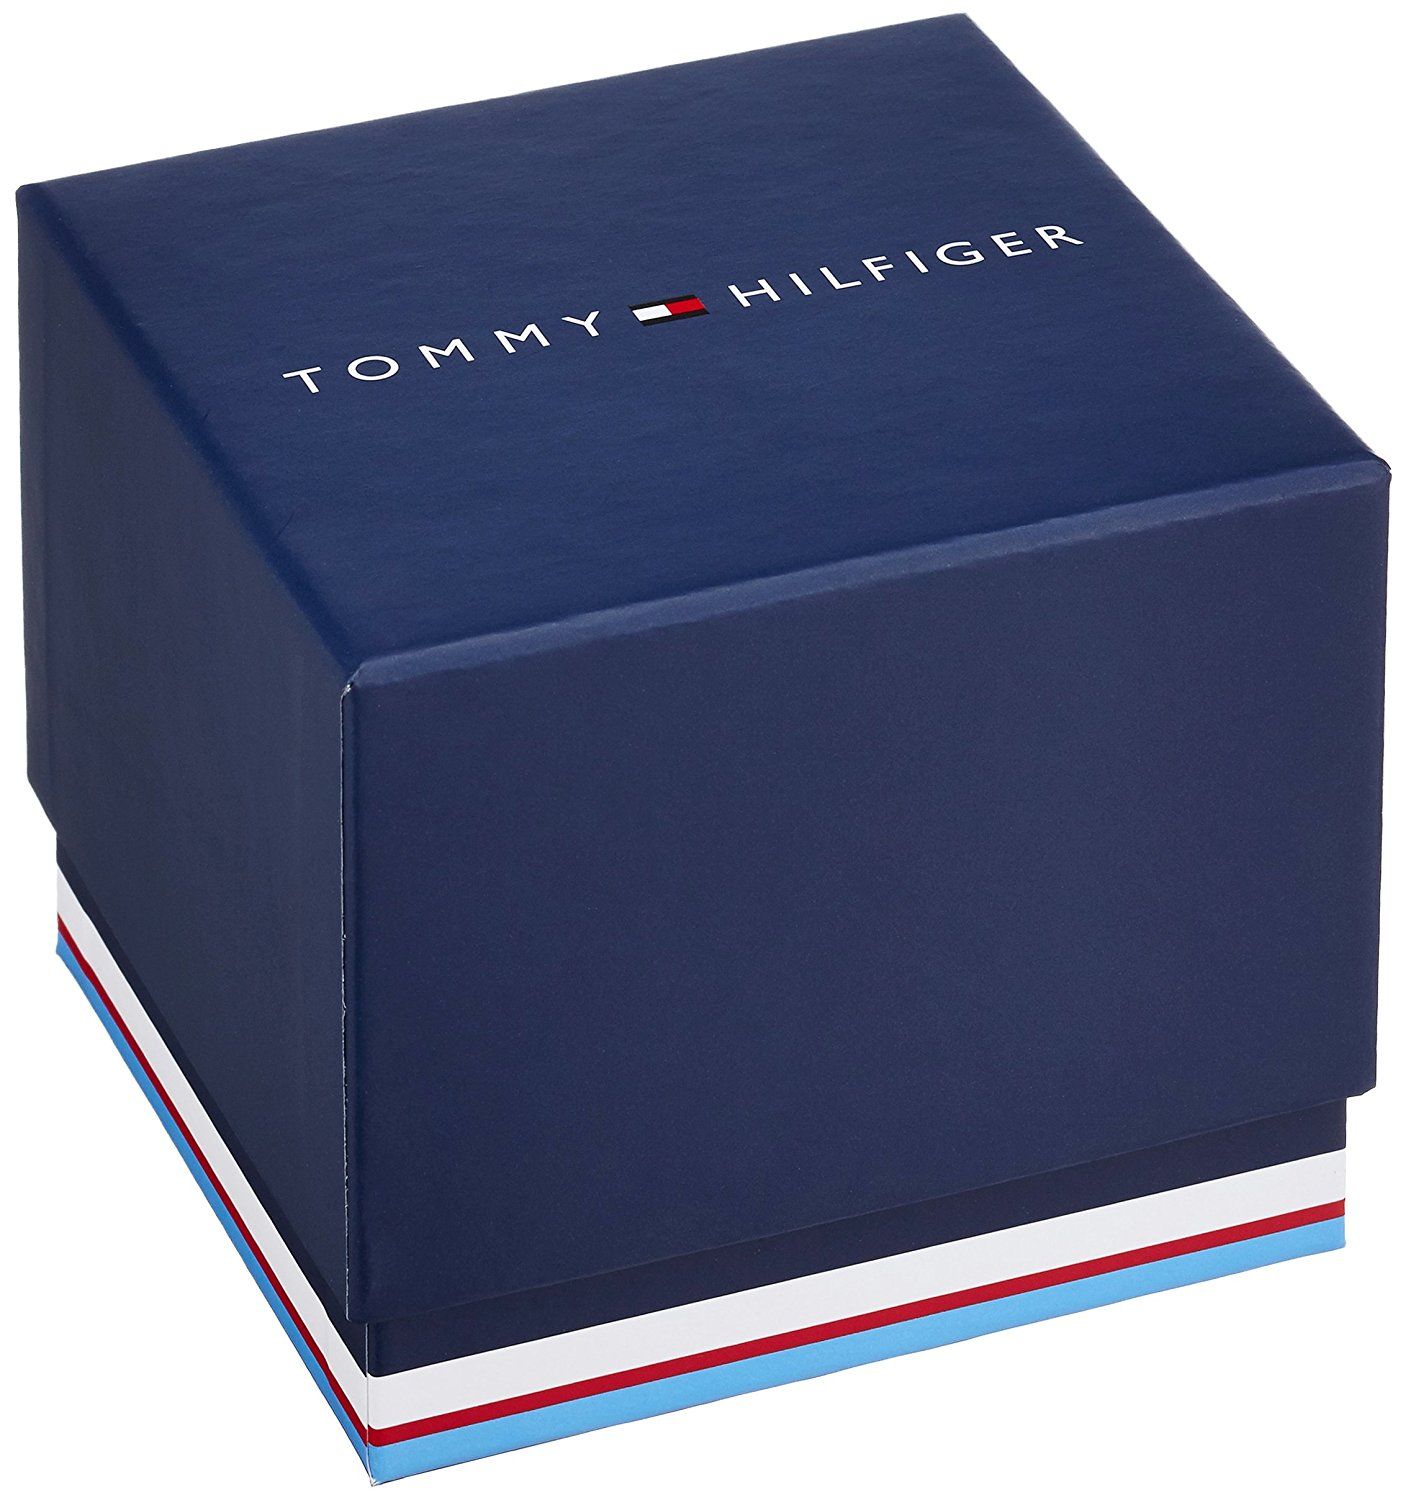 This Tommy Hilfiger Larson Multi Dial Watch for Men is the perfect timepiece to wear or to gift. It's Black 46 mm Round case combined with the comfortable Black Silicone will ensure you enjoy this stunning timepiece without any compromise. Operated by a high quality Quartz movement and water resistant to 5 bars, your watch will keep ticking. This fashionable watch with numbers on the bezel is a perfect gift for New Year, birthdays, Valentine's day and so on. -The watch has a calendar function: Day-Date, 24-hour Display. High quality 21 cm length and 20 mm width. Black Silicone strap with a Buckle. Case diameter: 46 mm, case thickness: 10 mm, case colour: Black and dial colour: Black